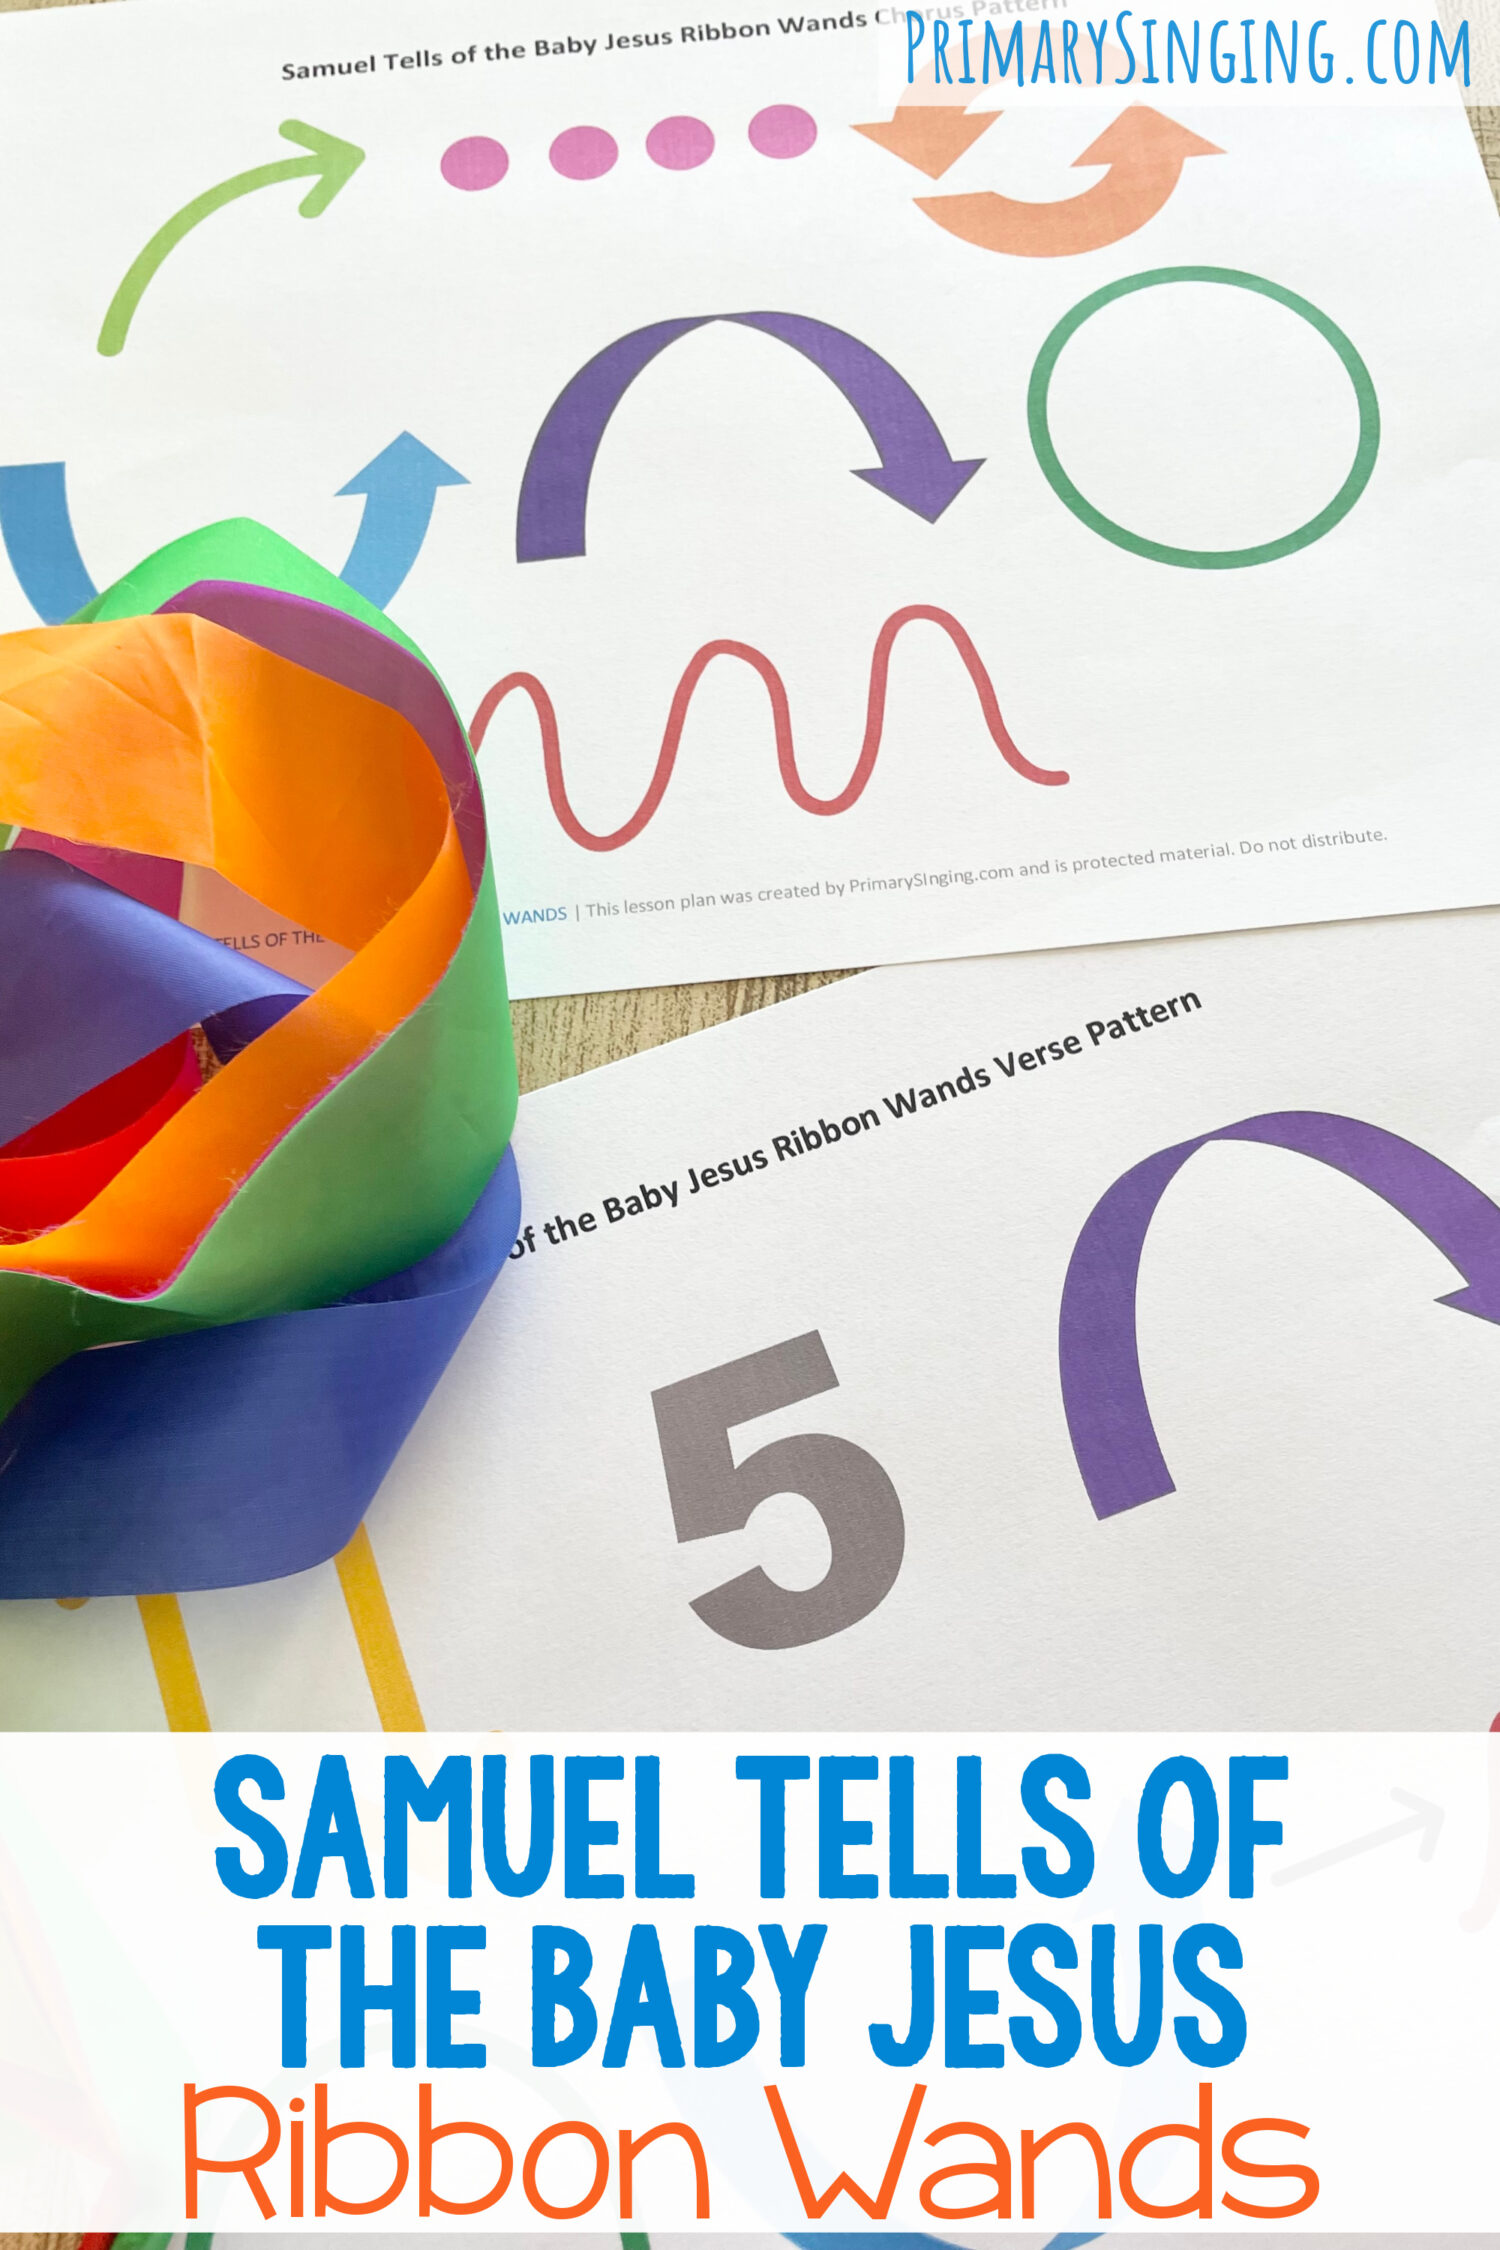 Samuel Tell of the Baby Jesus Ribbon Wands - use this fun ribbon wands movement activity to review this Christmas song with a printable pattern for LDS Primary Music Leaders.